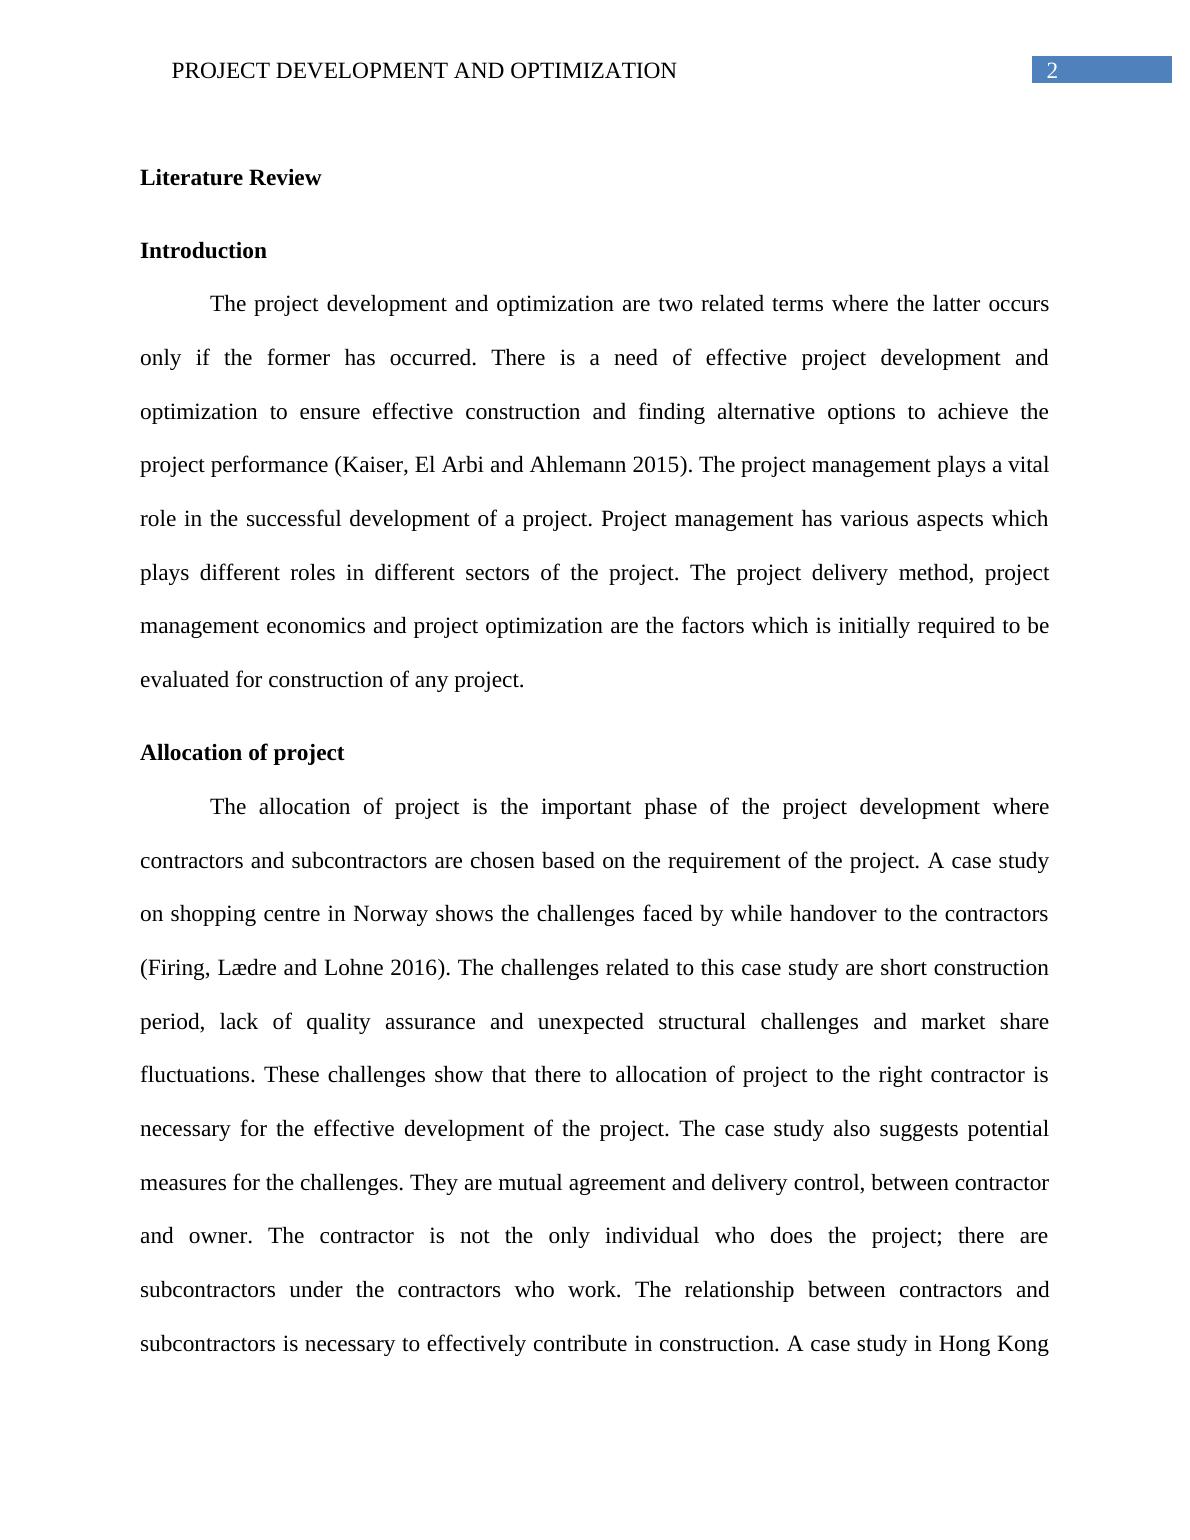 Project Development and Optimization - Assignment PDF_3